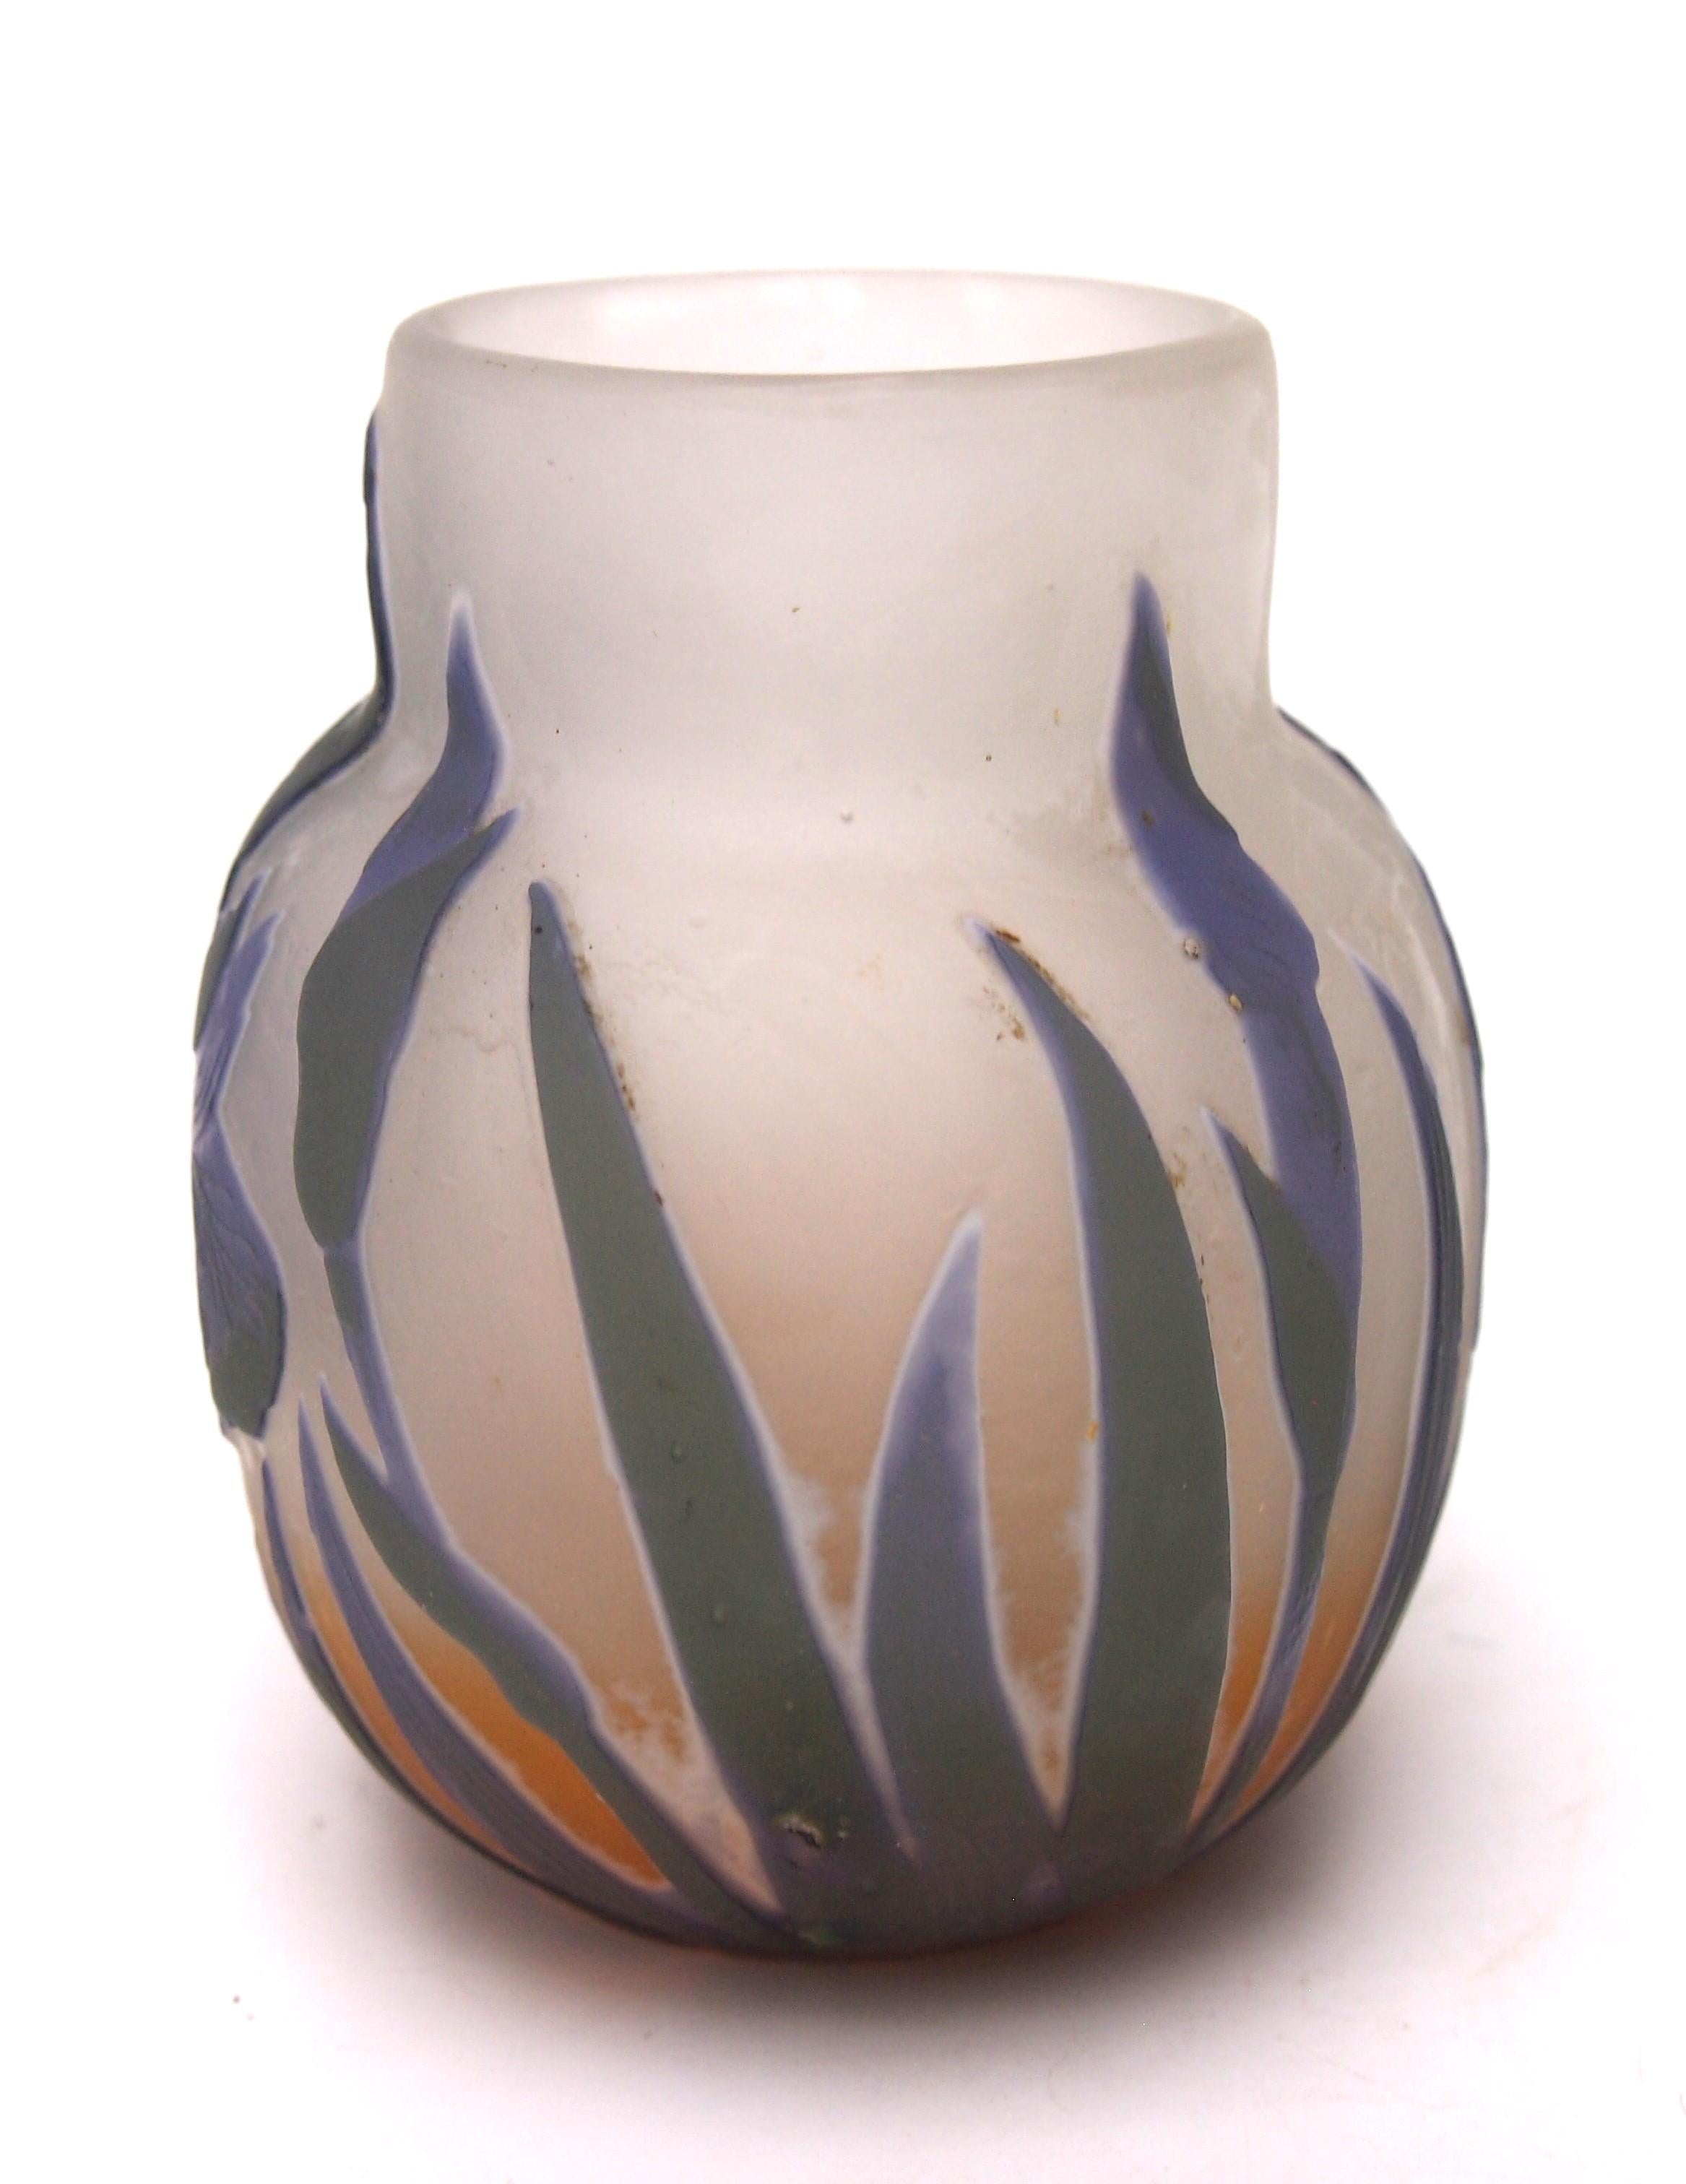 Rare four colour Emile Galle cameo vase in green, purple and opaque white over bright orange depicting striking blooming Irises and leaves. This is a pattern designed c1908 and this example dates to c1908 (Signed Provost Mark III -see signature